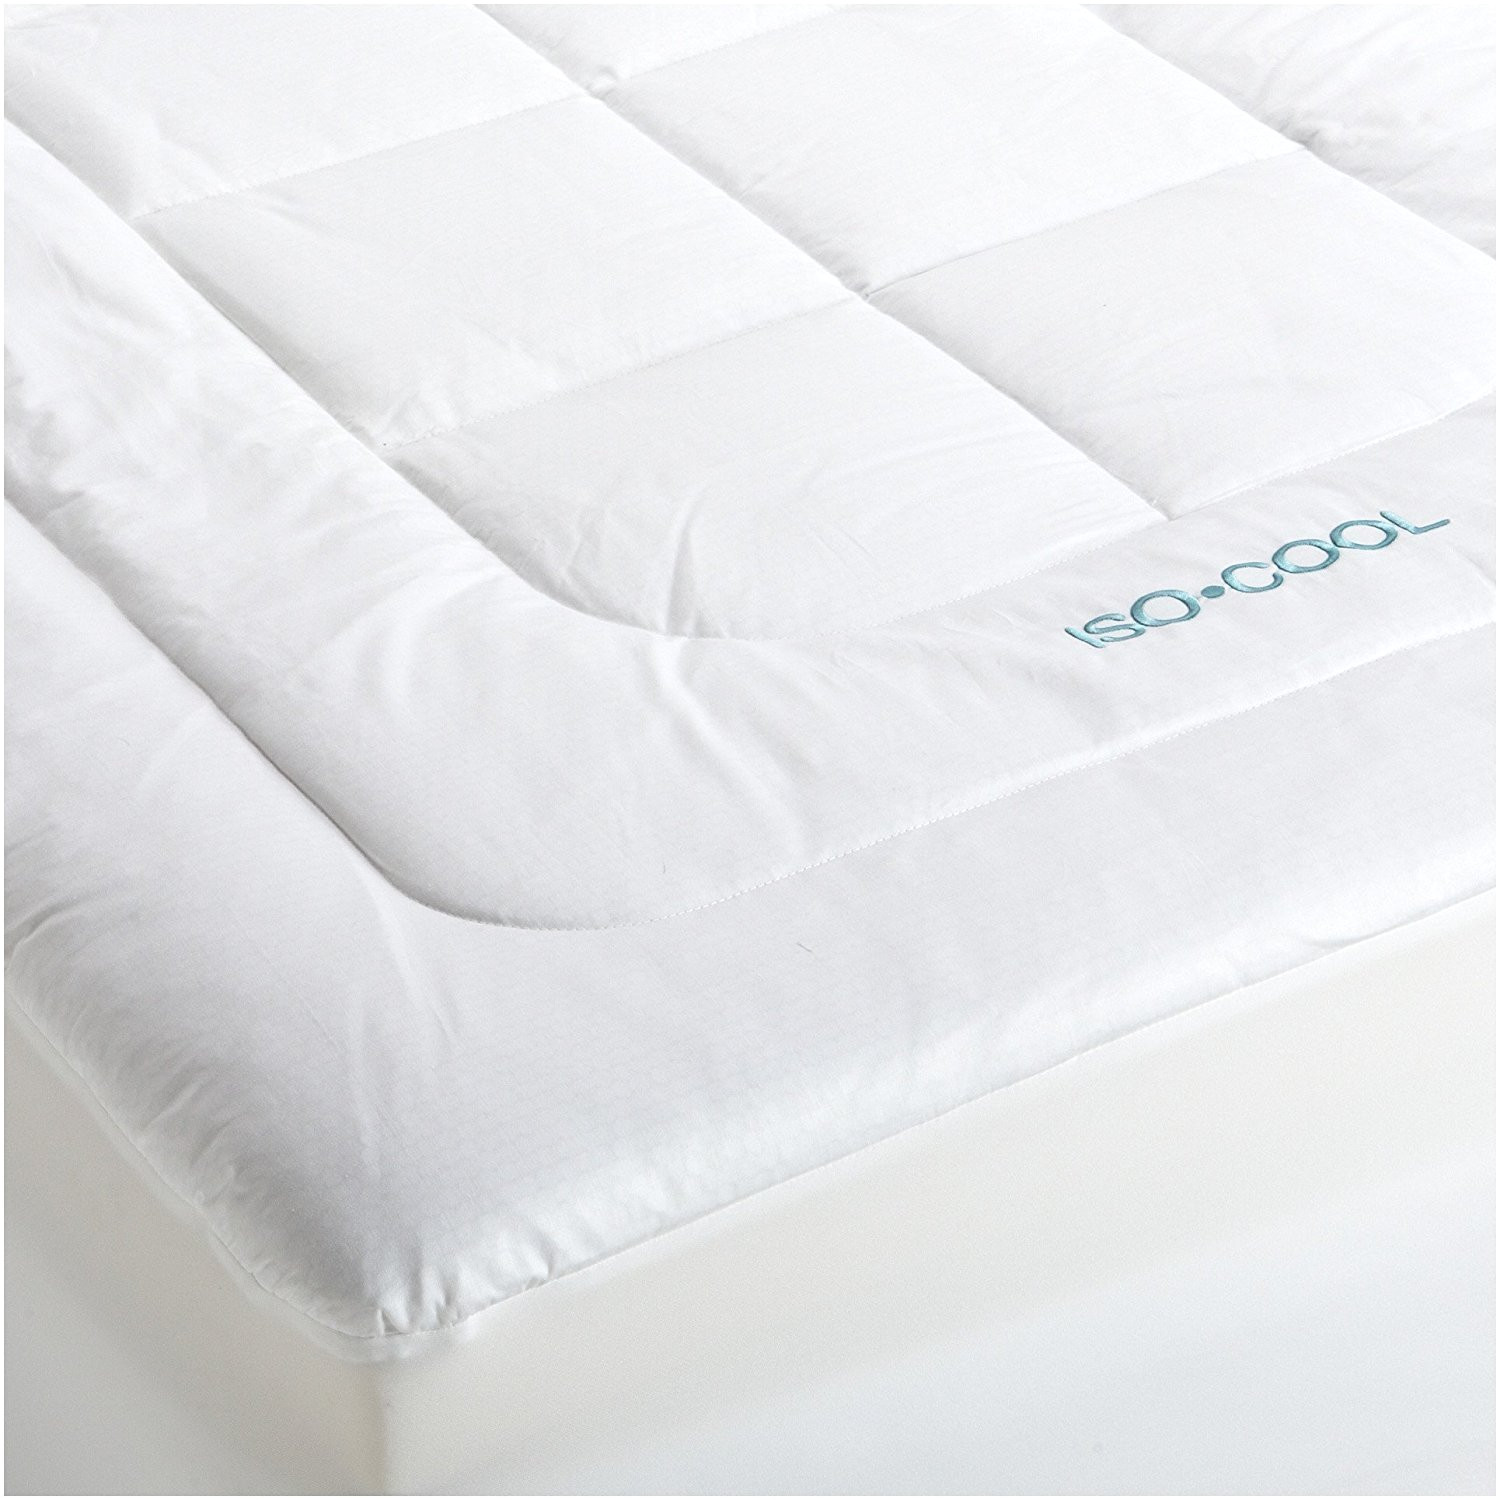 amazon com iso cool memory foam mattress topper with outlast cover king home kitchen